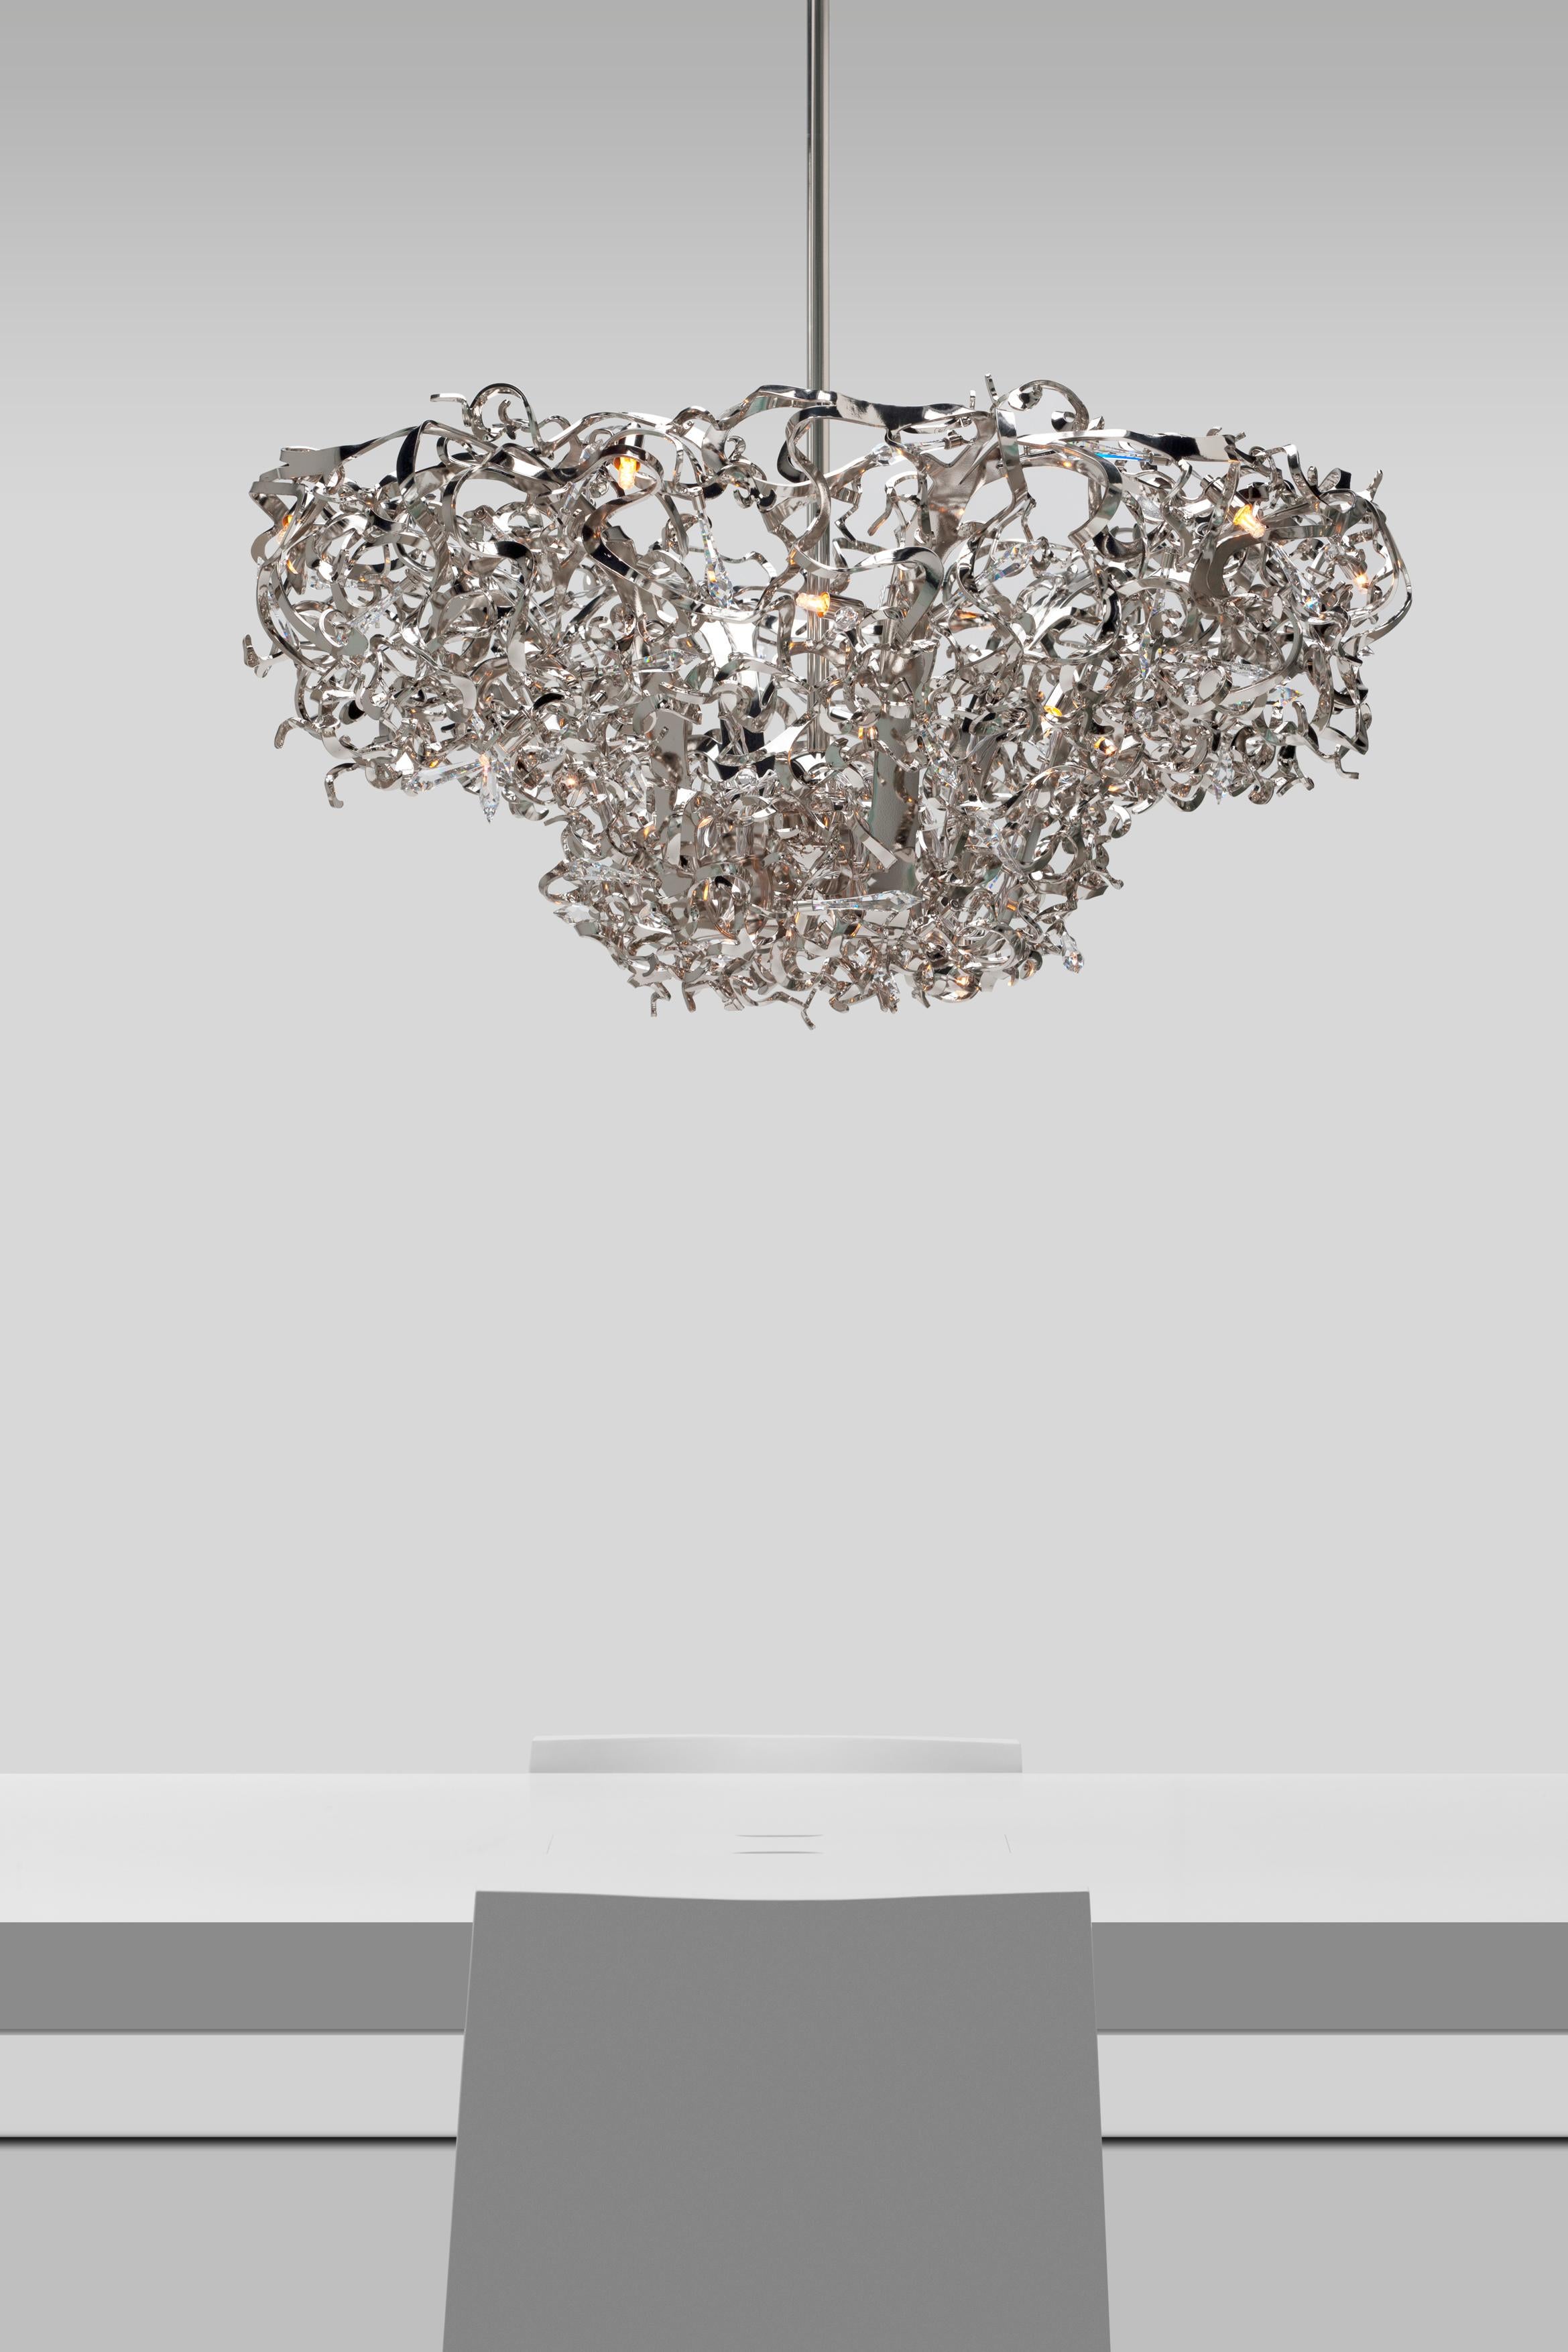 This modern chandelier in a black finish is part of the Icy Lady collection, designed by William Brand, founder of Brand van Egmond. Handcrafted in materials of the highest quality and dressed with sparkling crystals, the Icy Lady collection is an